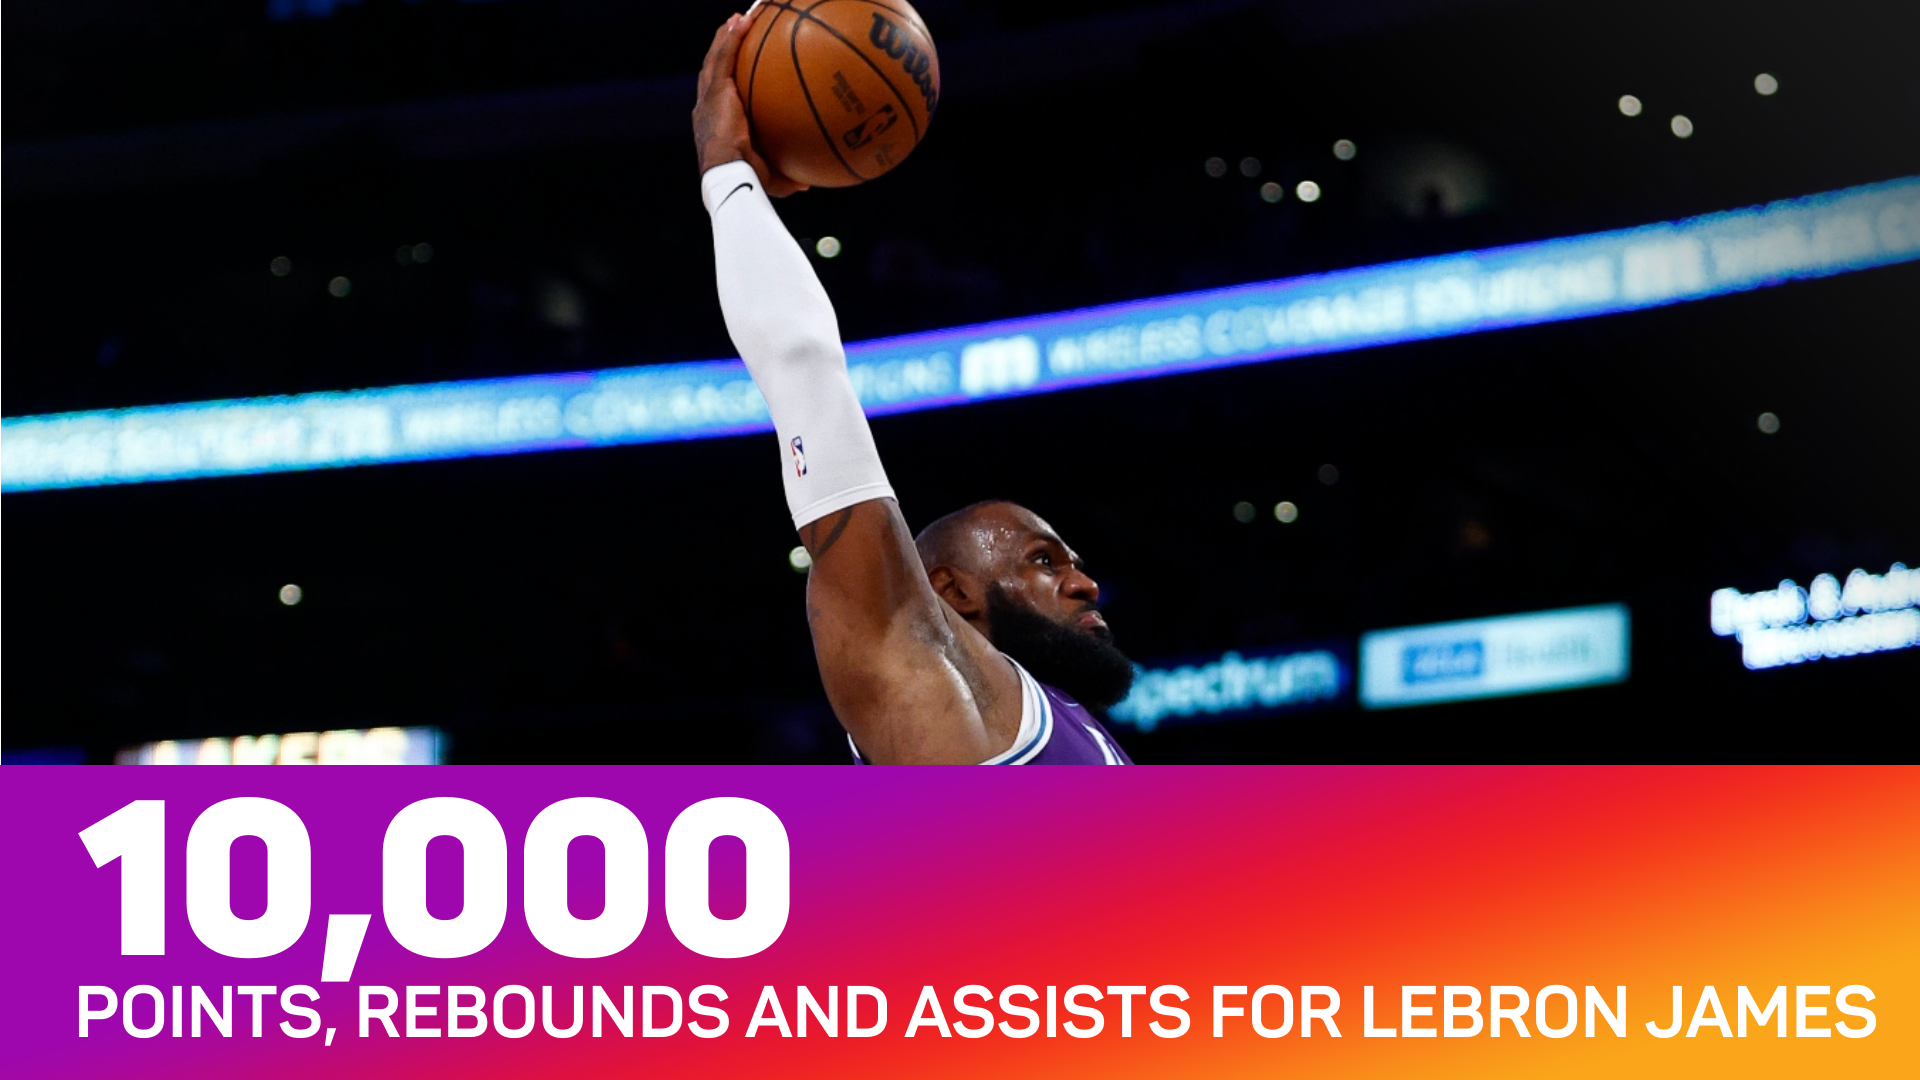 LeBron James has 10,000 points, rebounds and assists in NBA